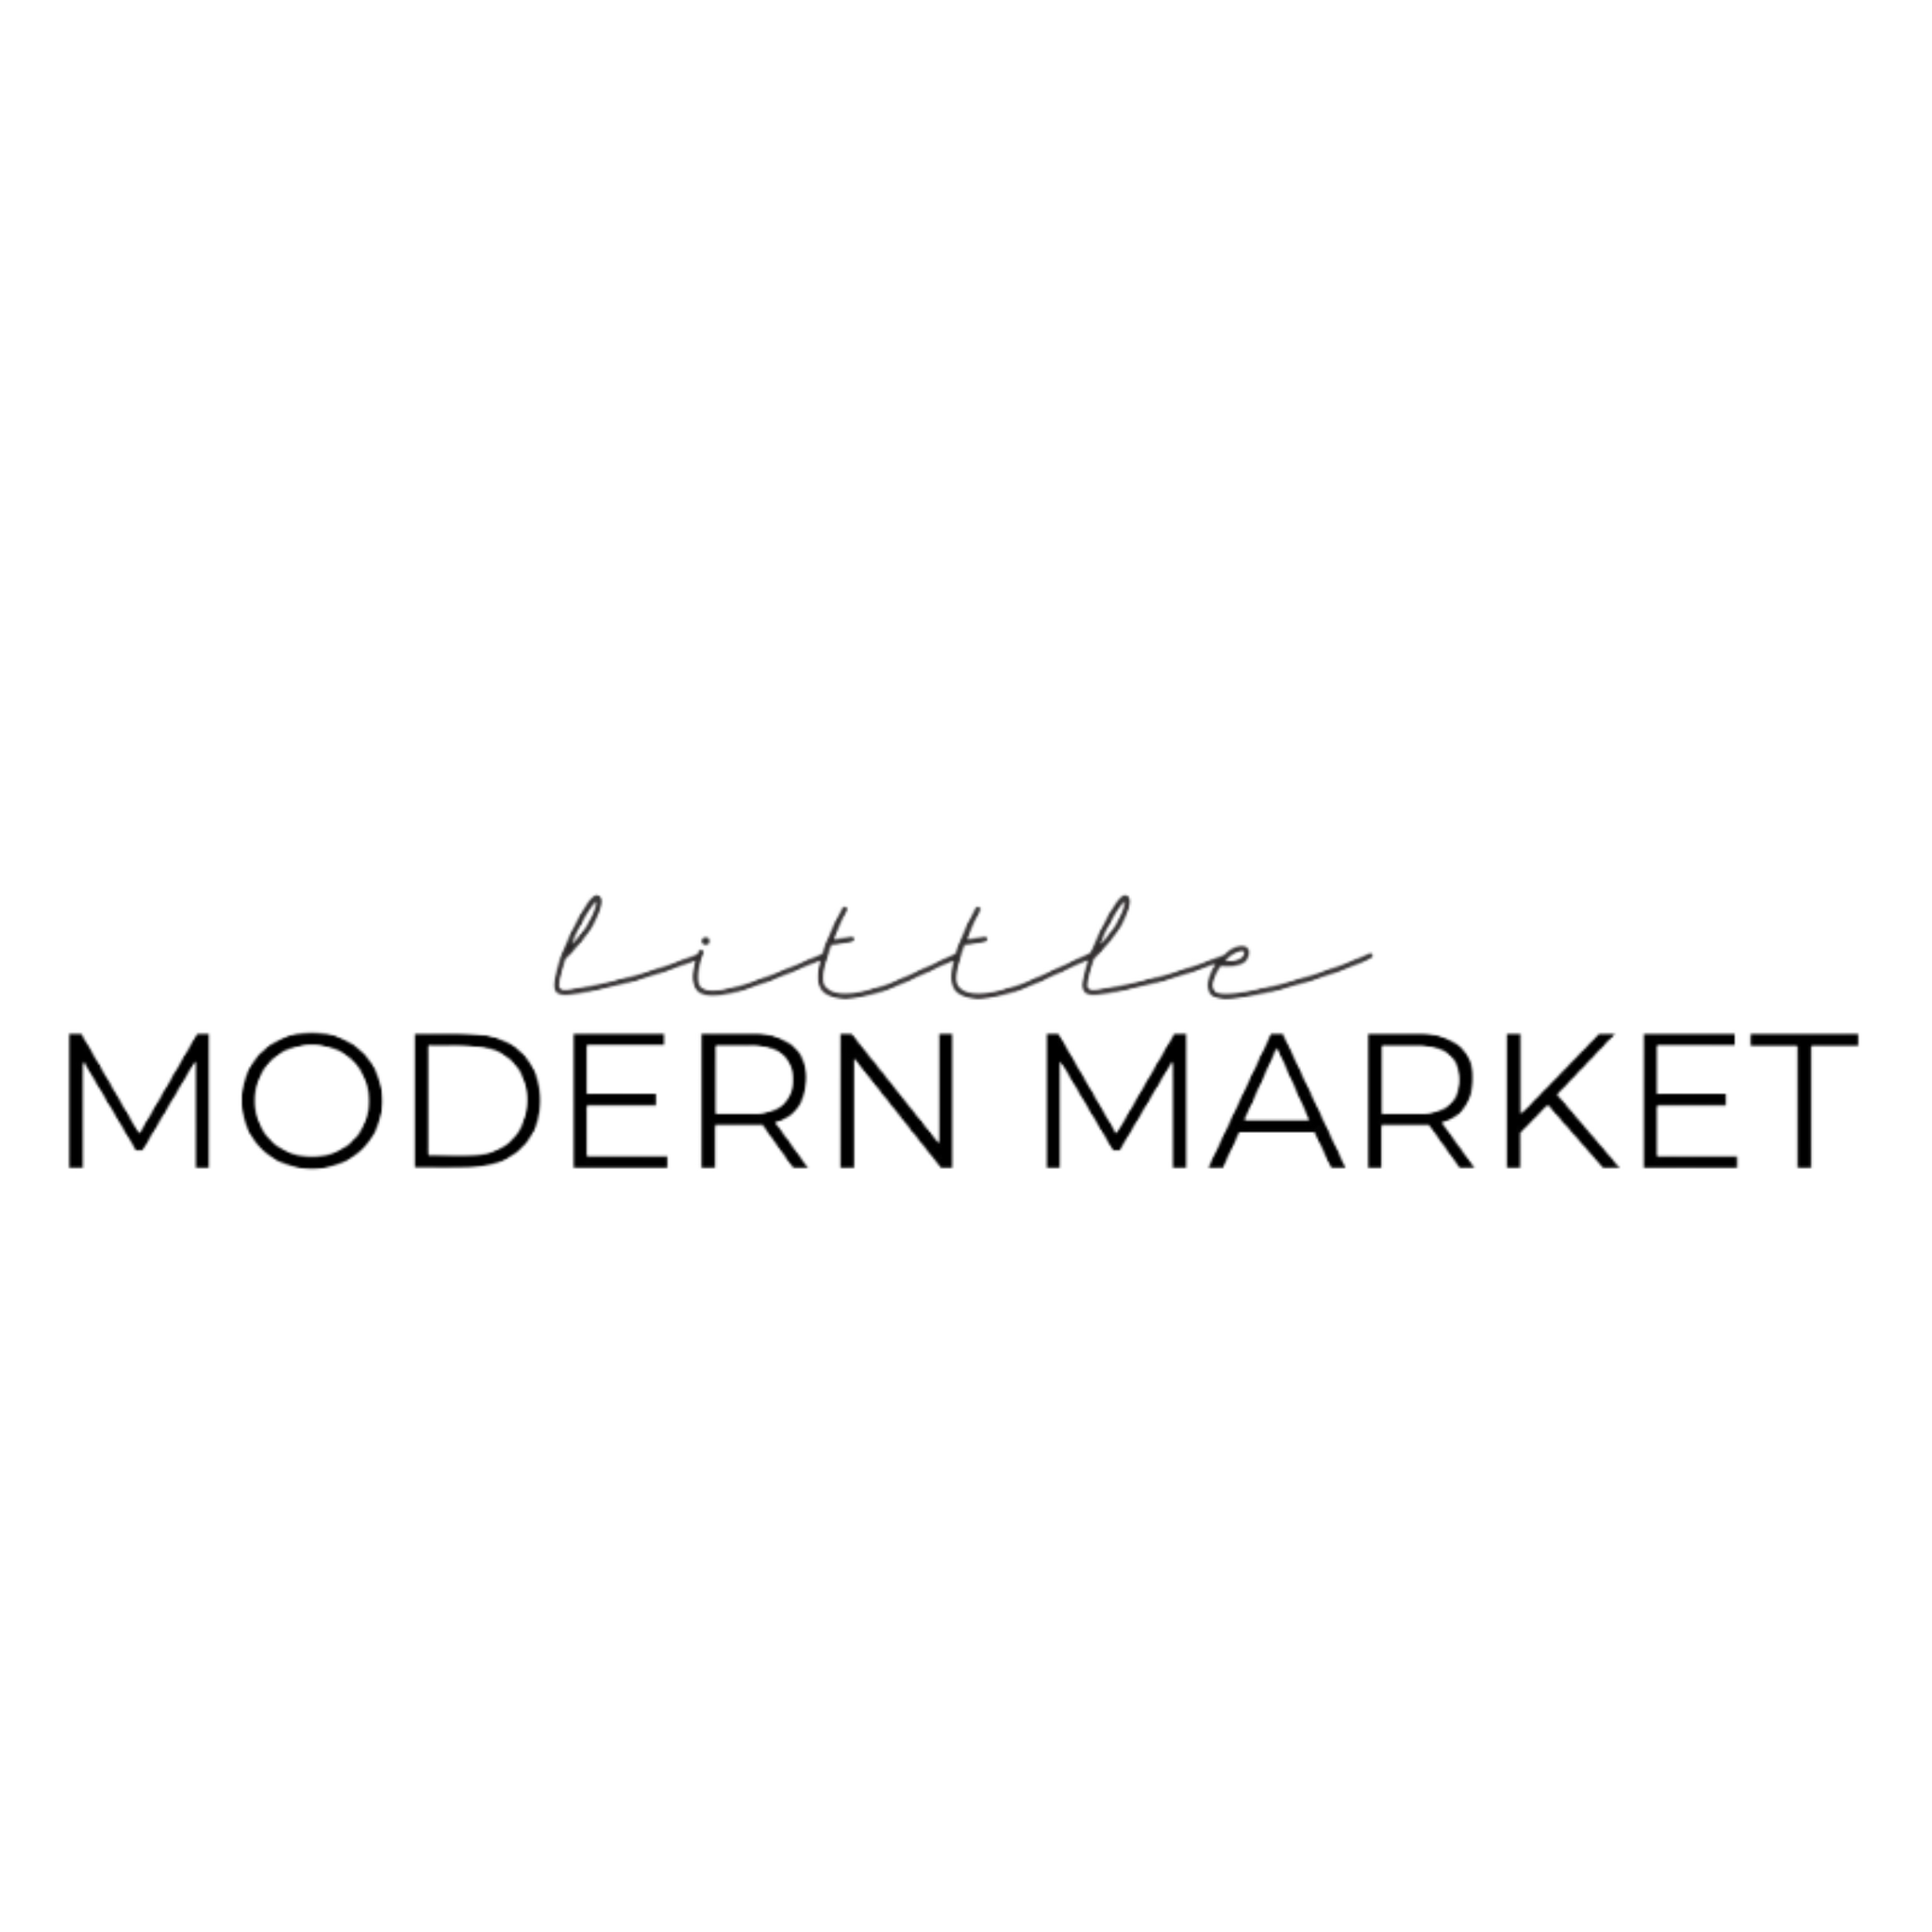 This is the logo of Little Modern Market which is a local shopping event that happens multiple time per year in Calgary, Alberta, Canada.